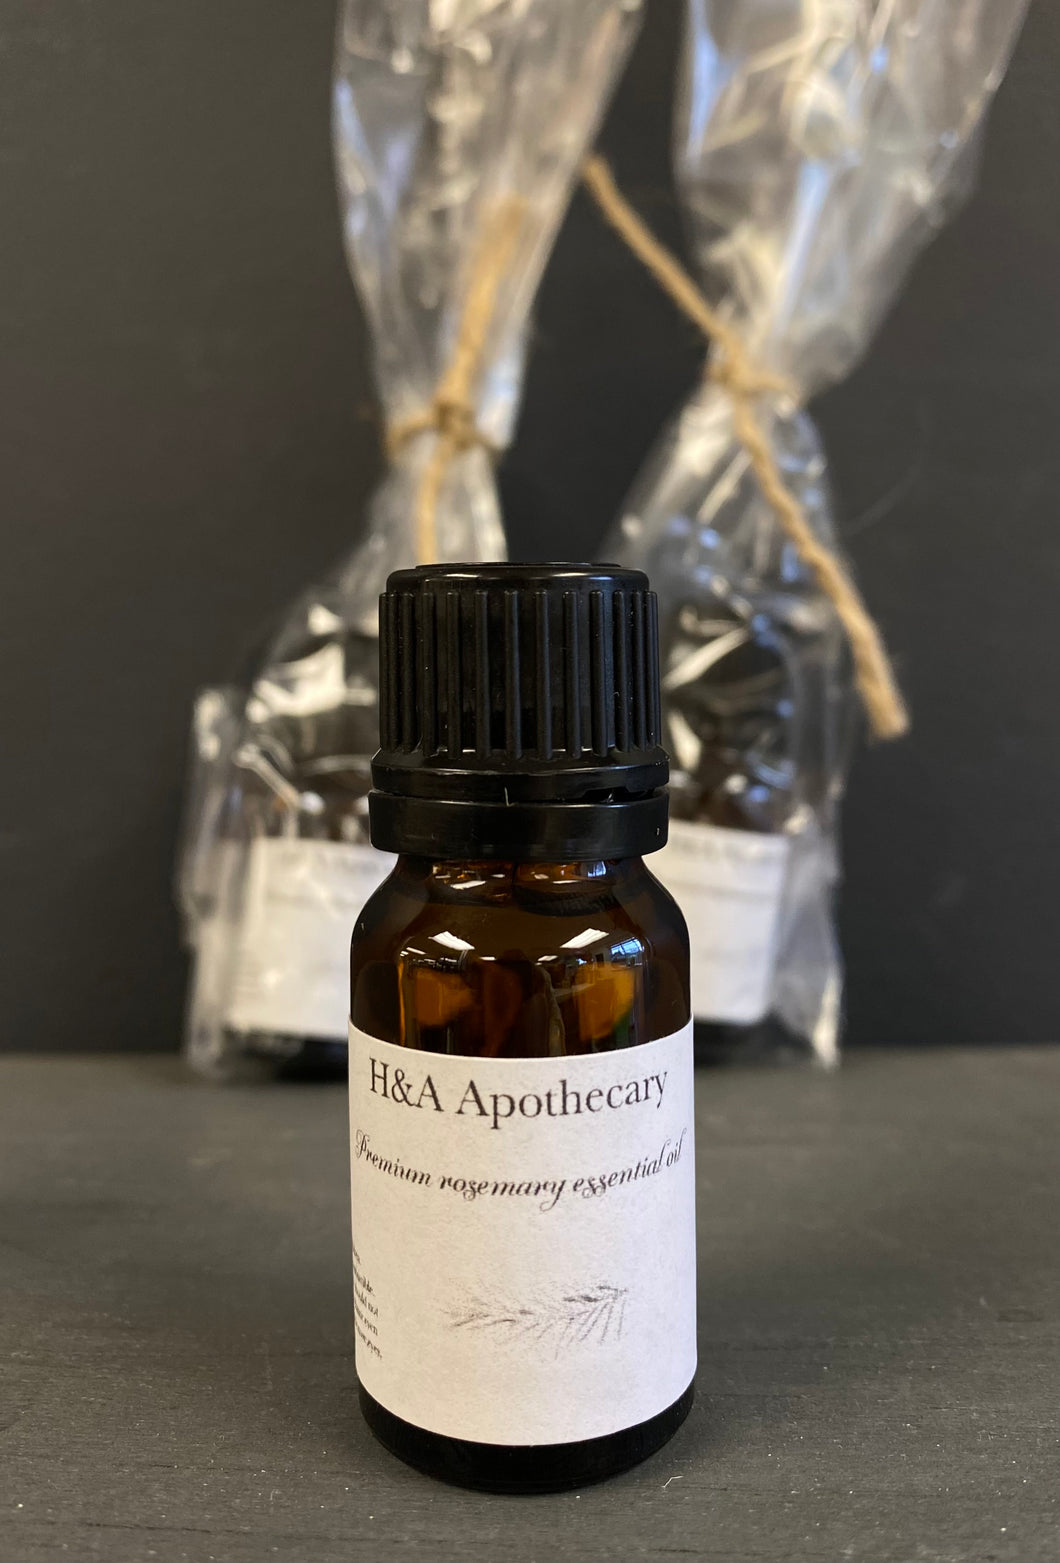 H&A Apothecary Premium Spanish Rosemary Essential Oil